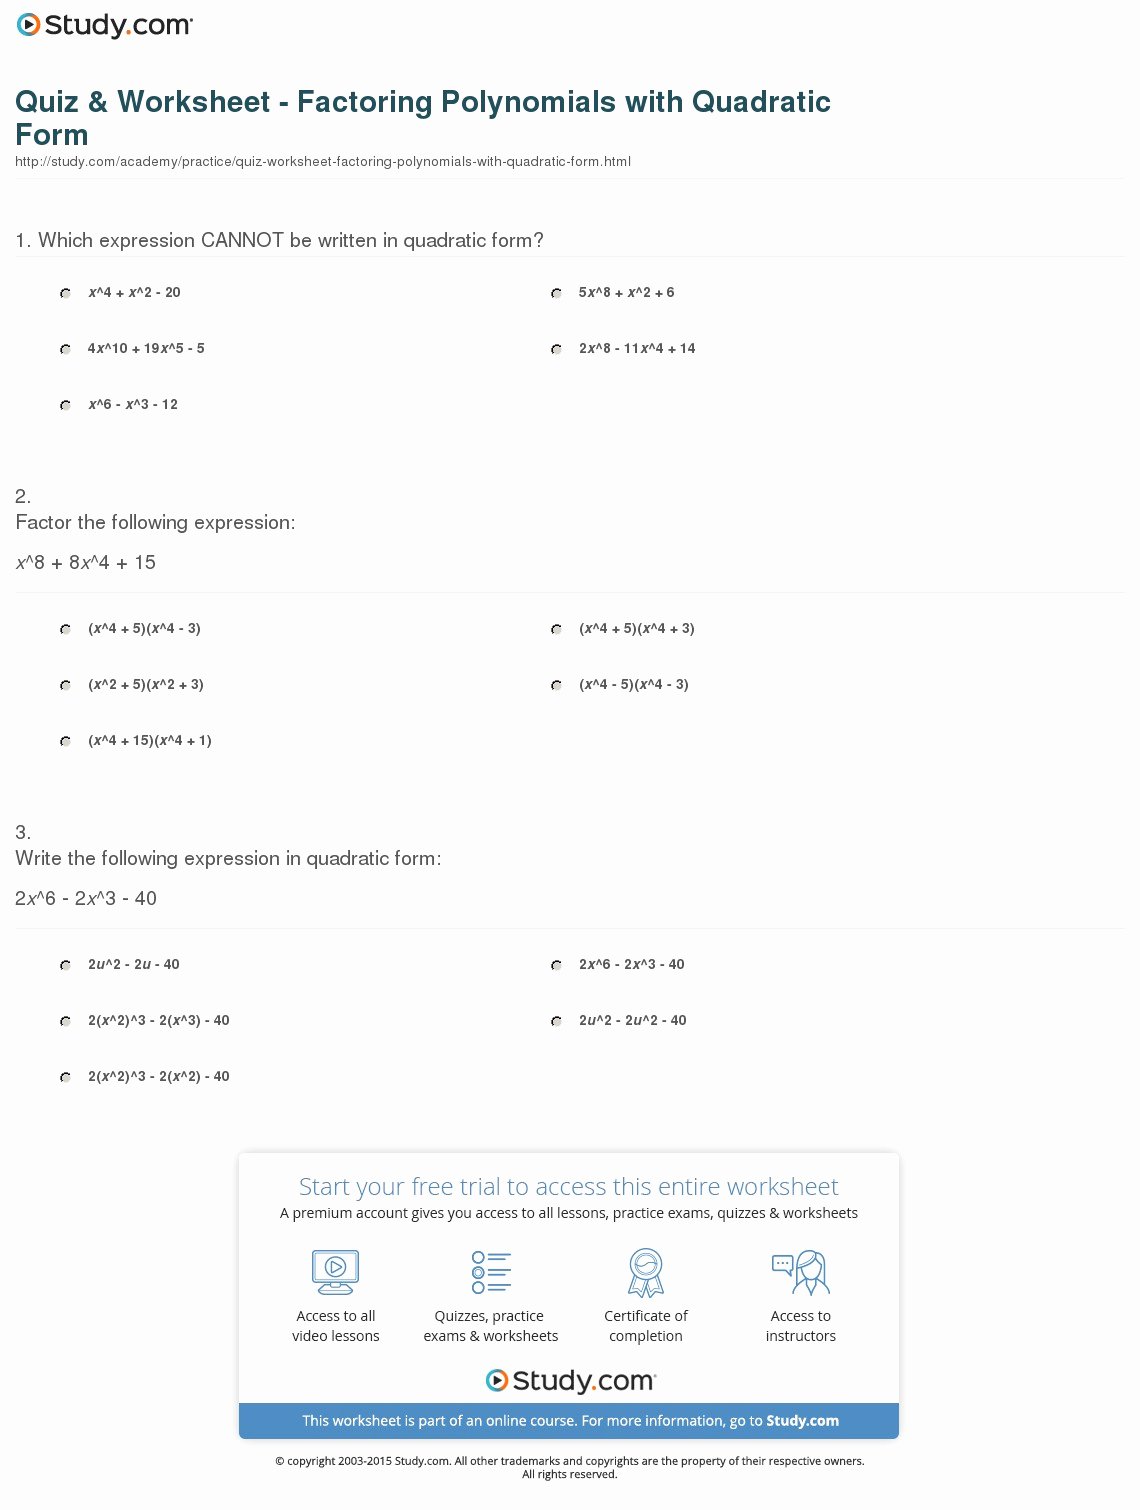 Factoring Practice Worksheet Answers Awesome Quiz &amp; Worksheet Factoring Polynomials with Quadratic